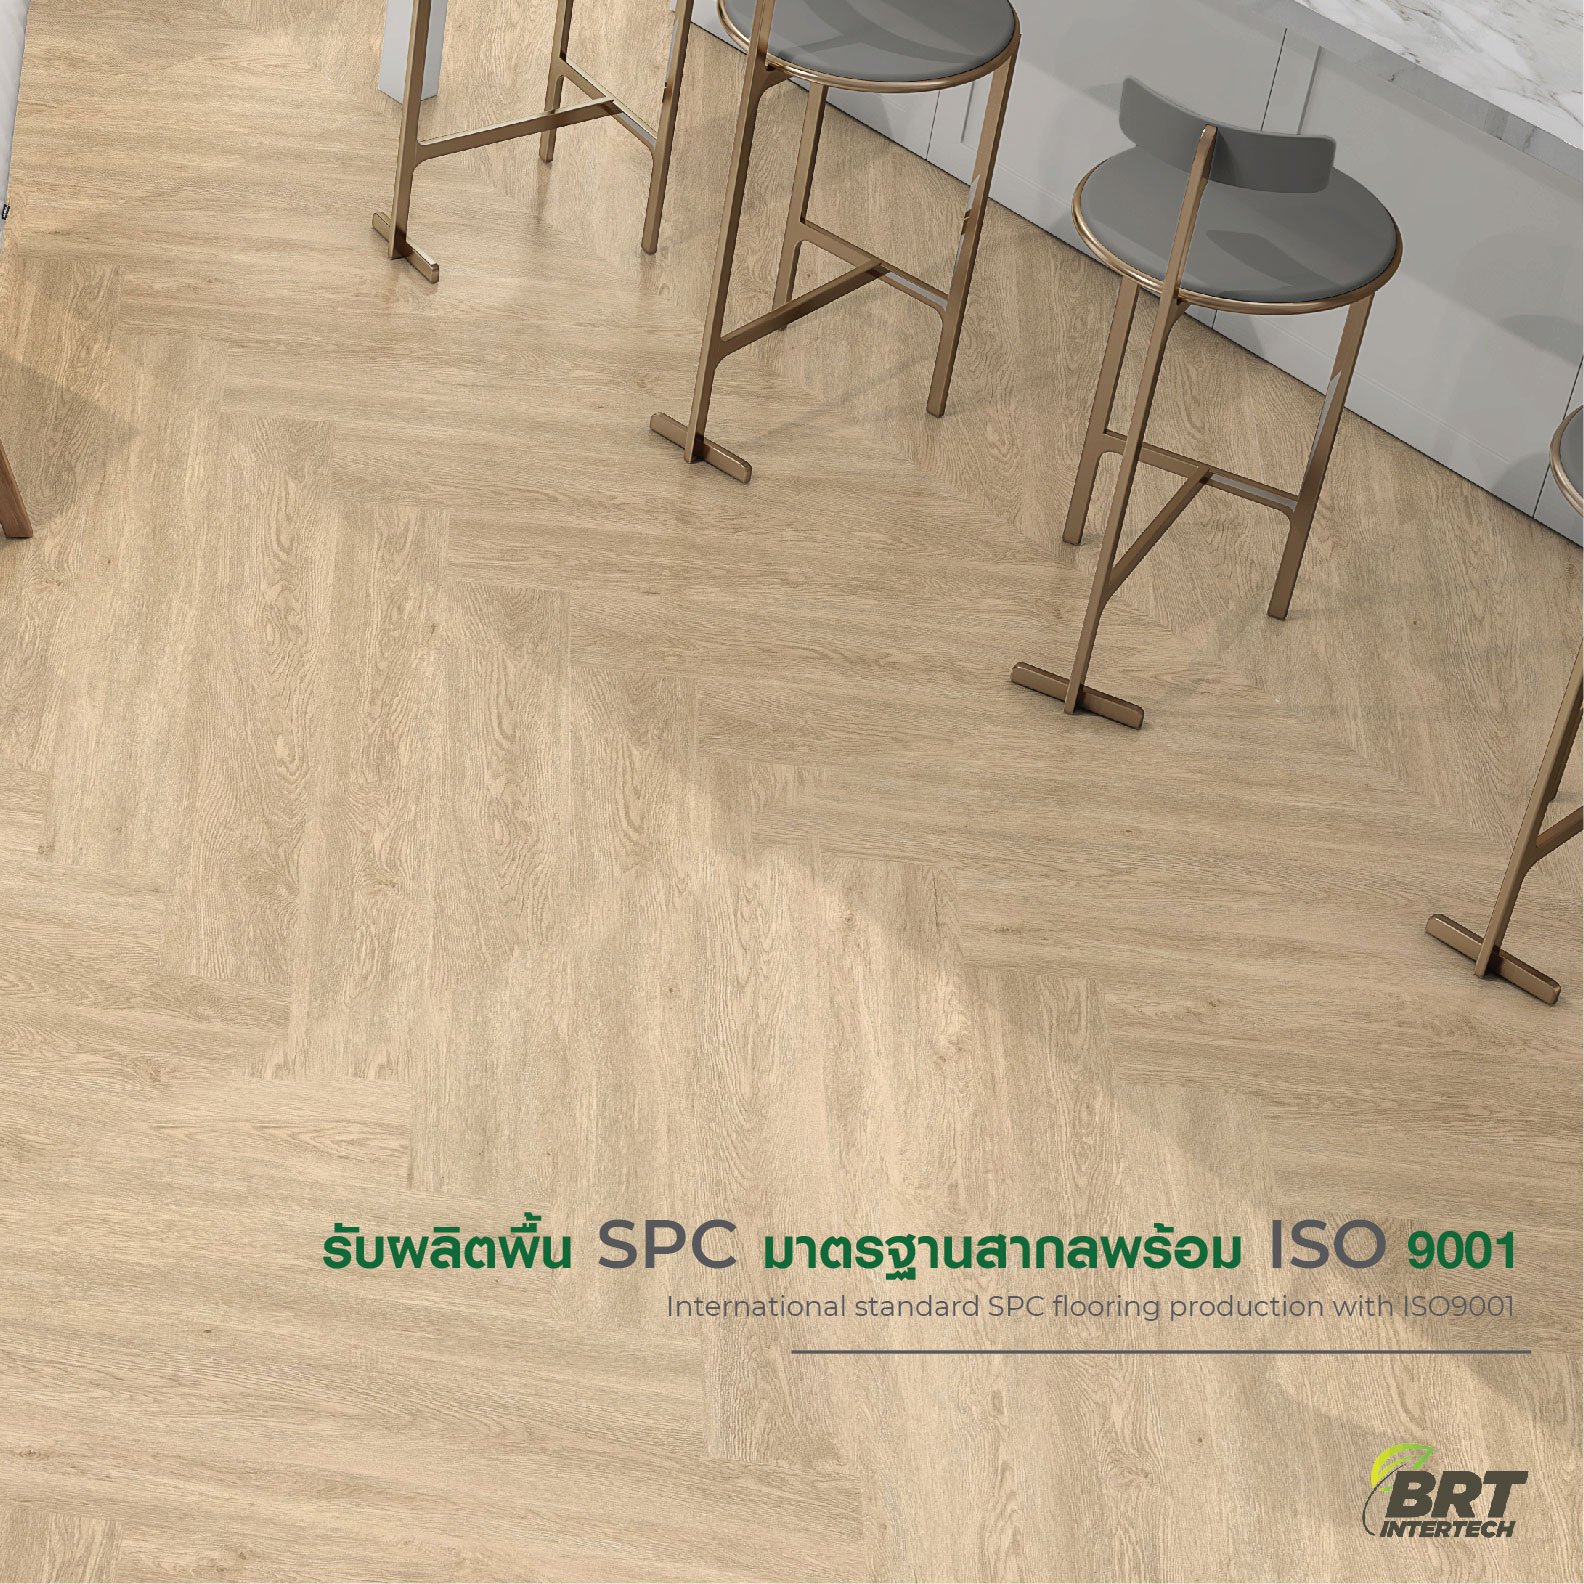 International standard SPC flooring production with ISO9001